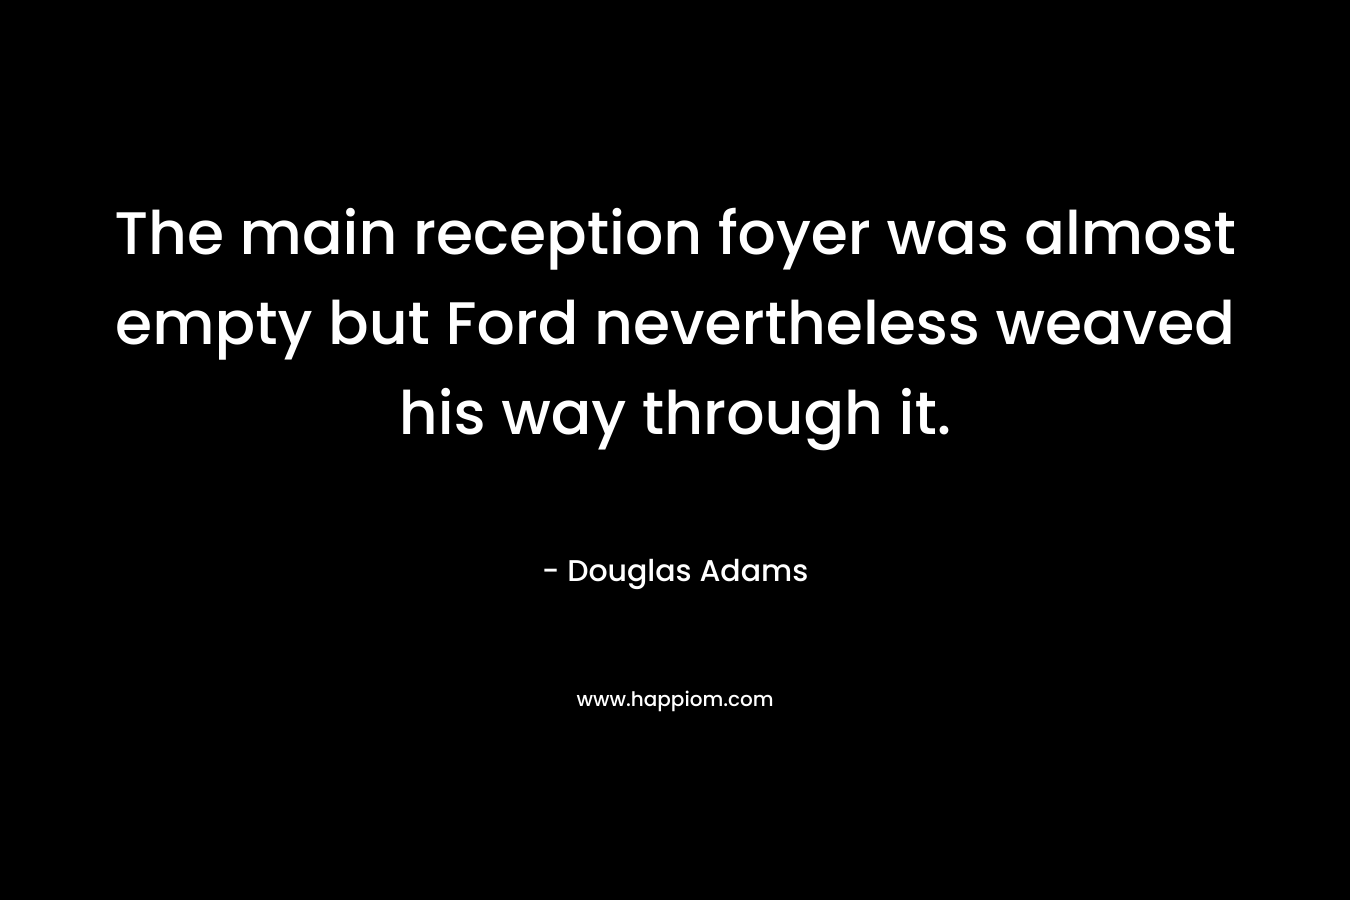 The main reception foyer was almost empty but Ford nevertheless weaved his way through it. – Douglas Adams